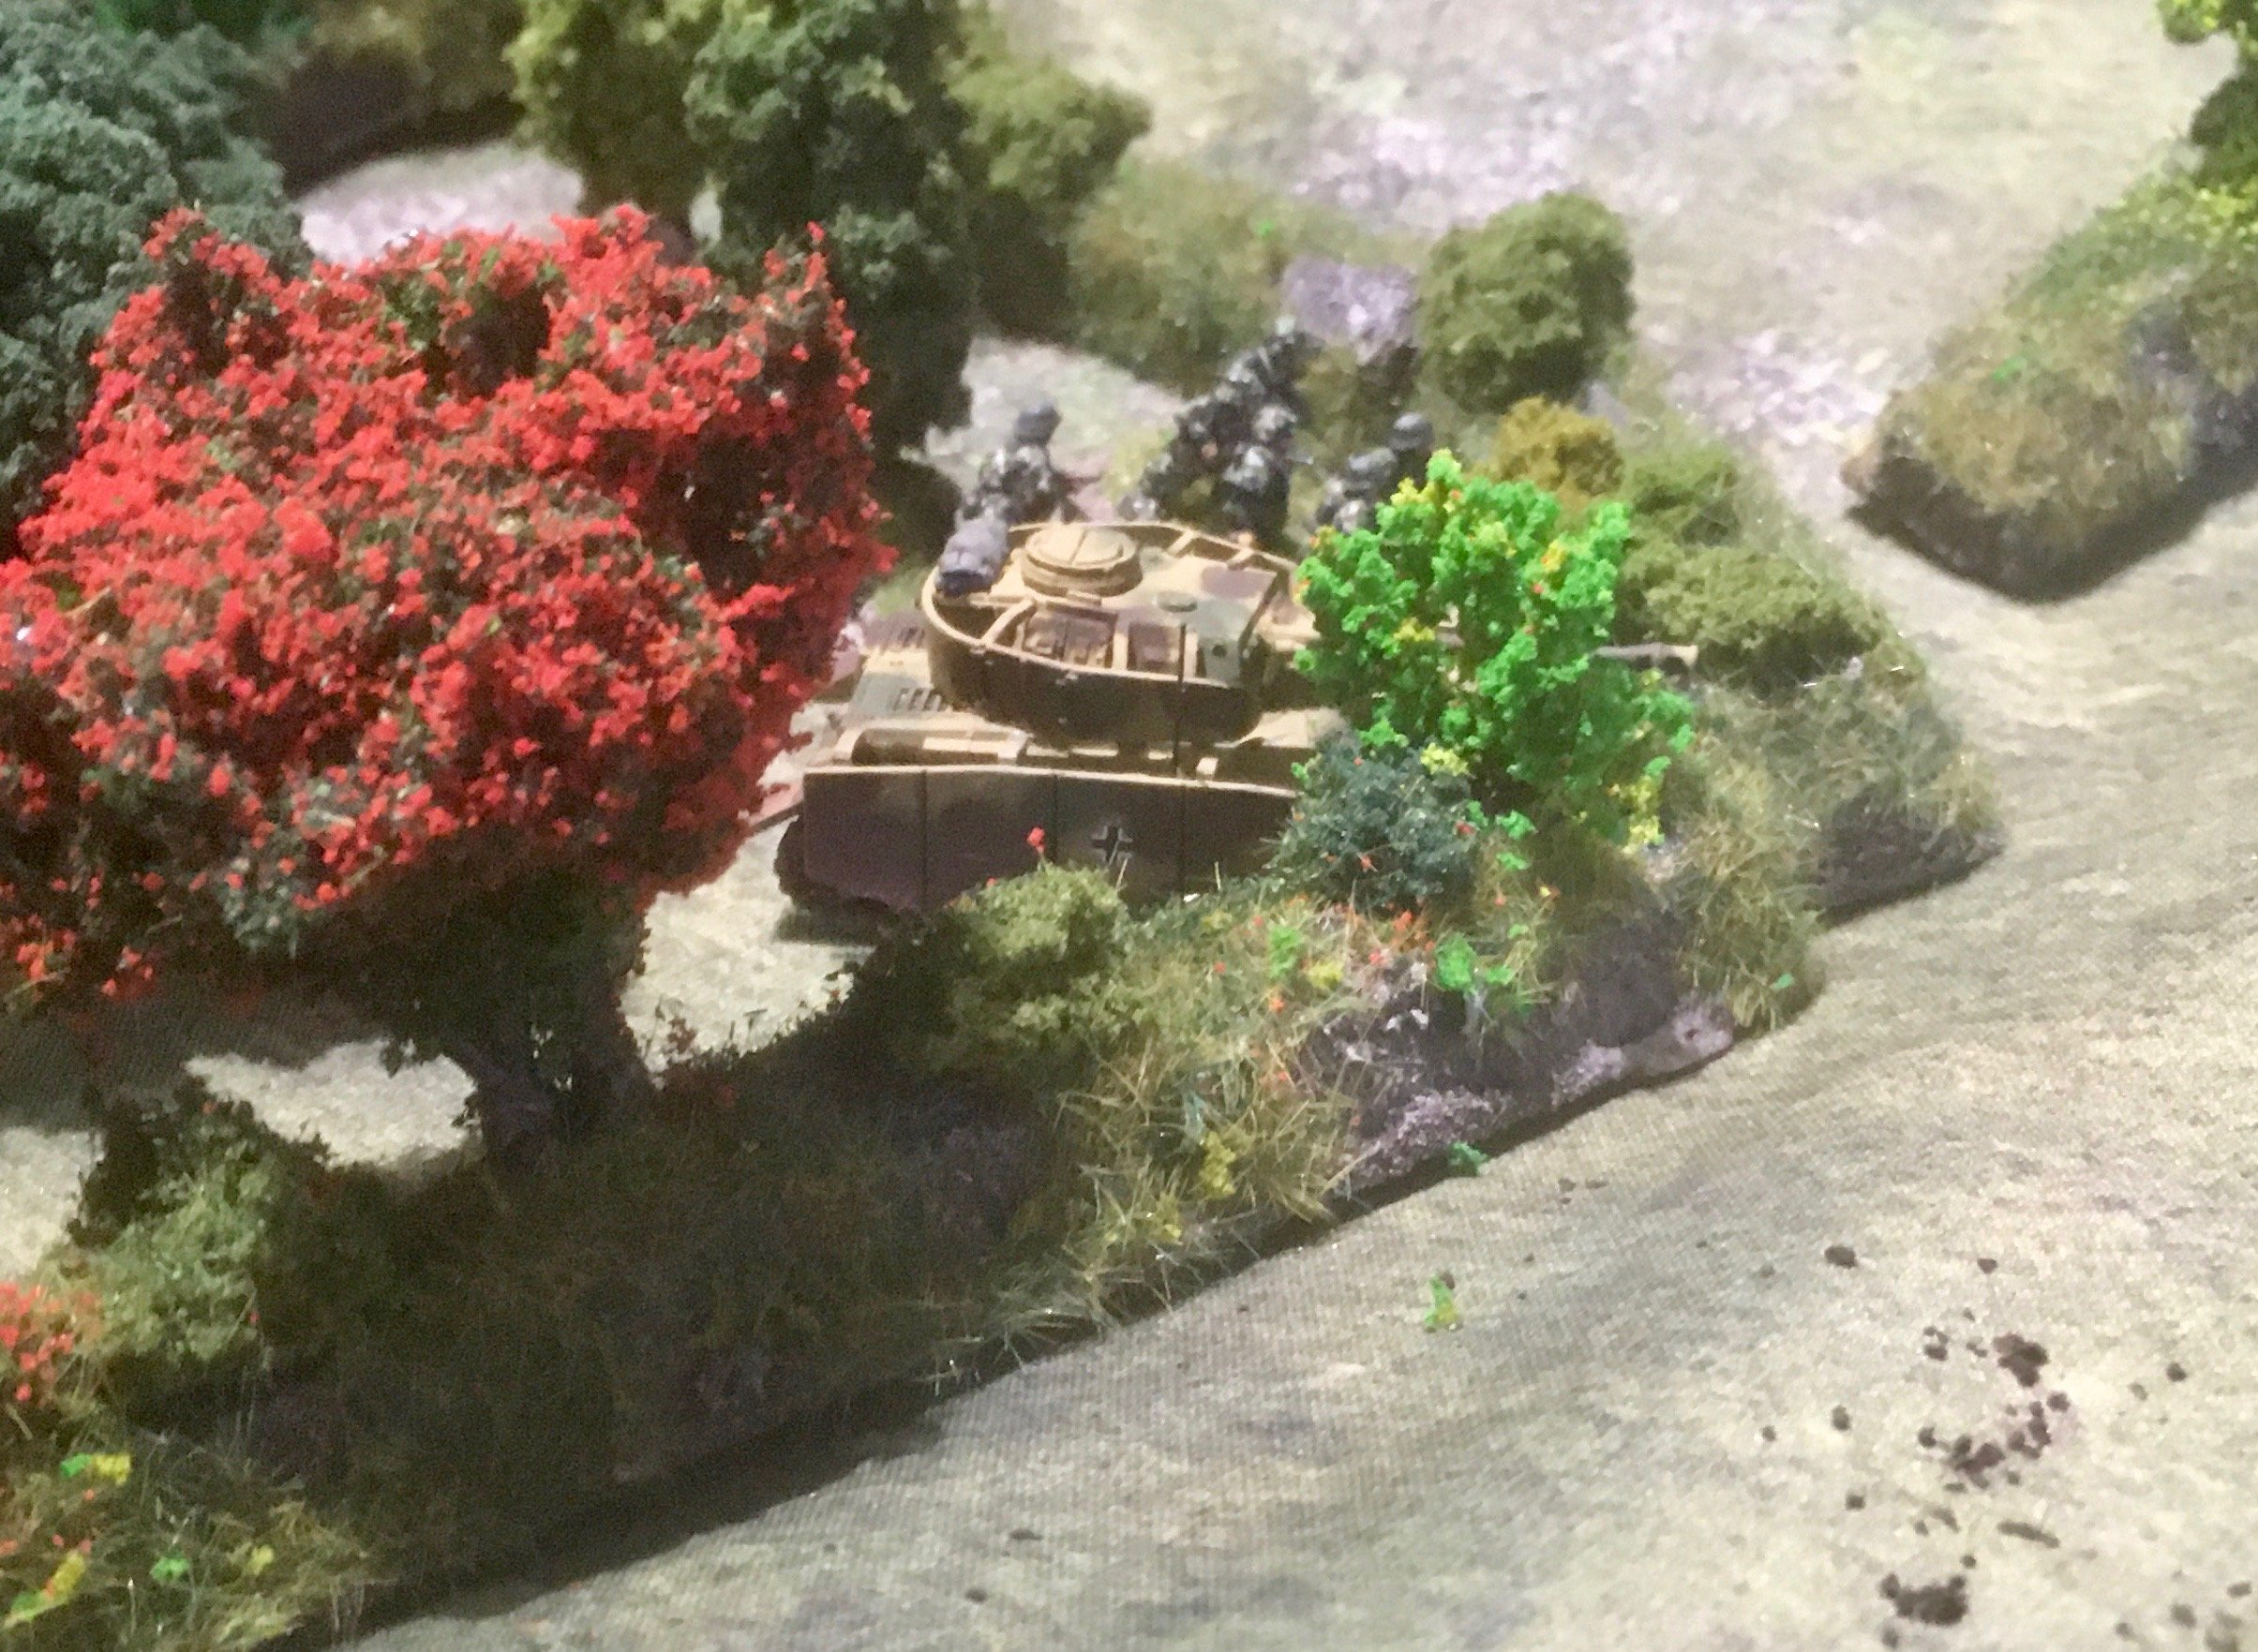 Which had a nice flank shot of the Panzer IV in the centre...